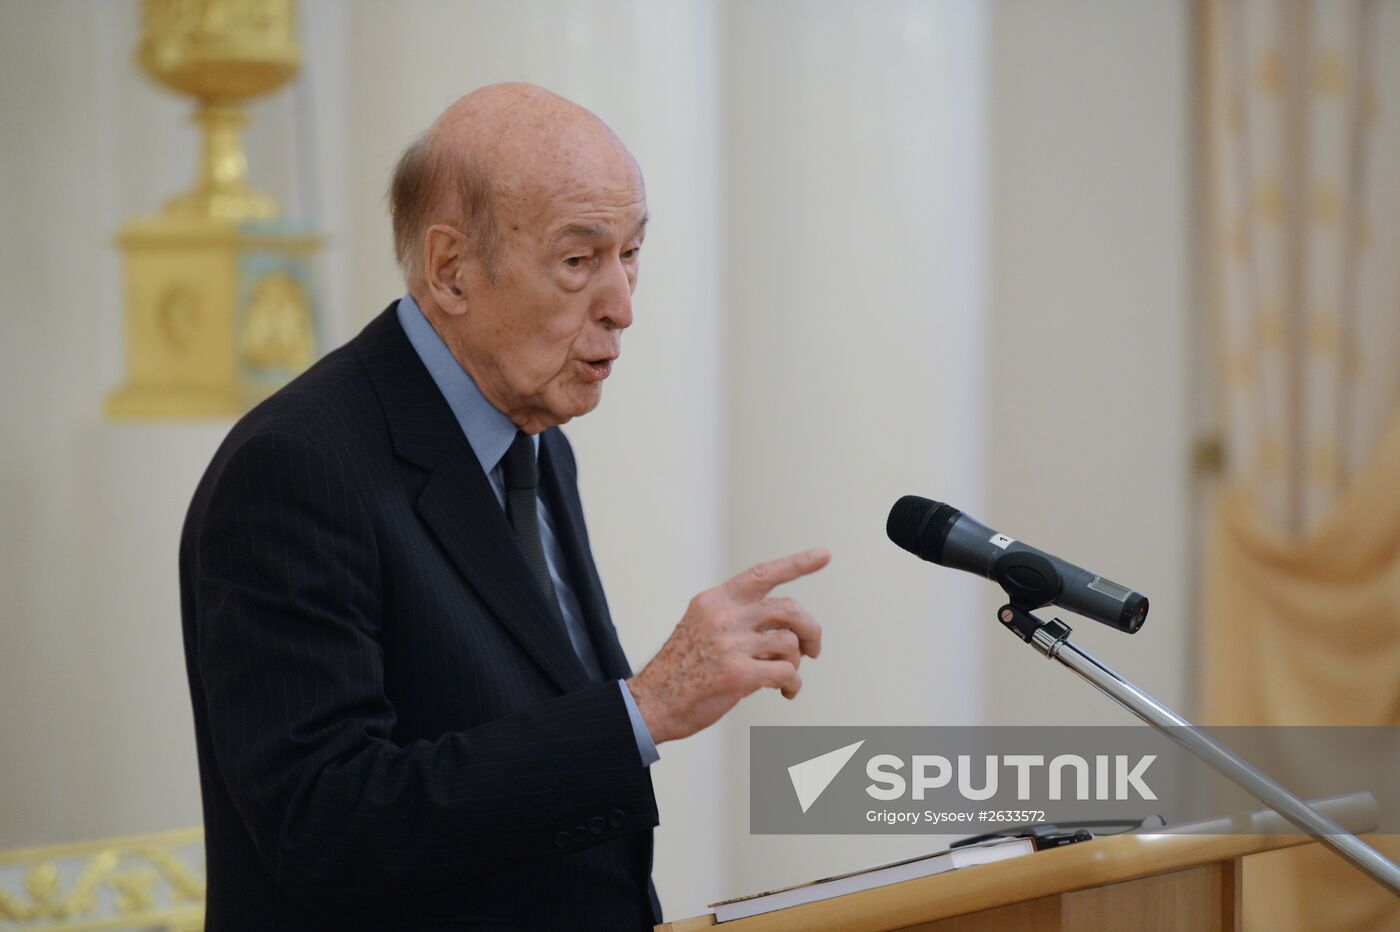 Former French president Giscard d'Estaing's book 'Victory of the Grand Army' presented